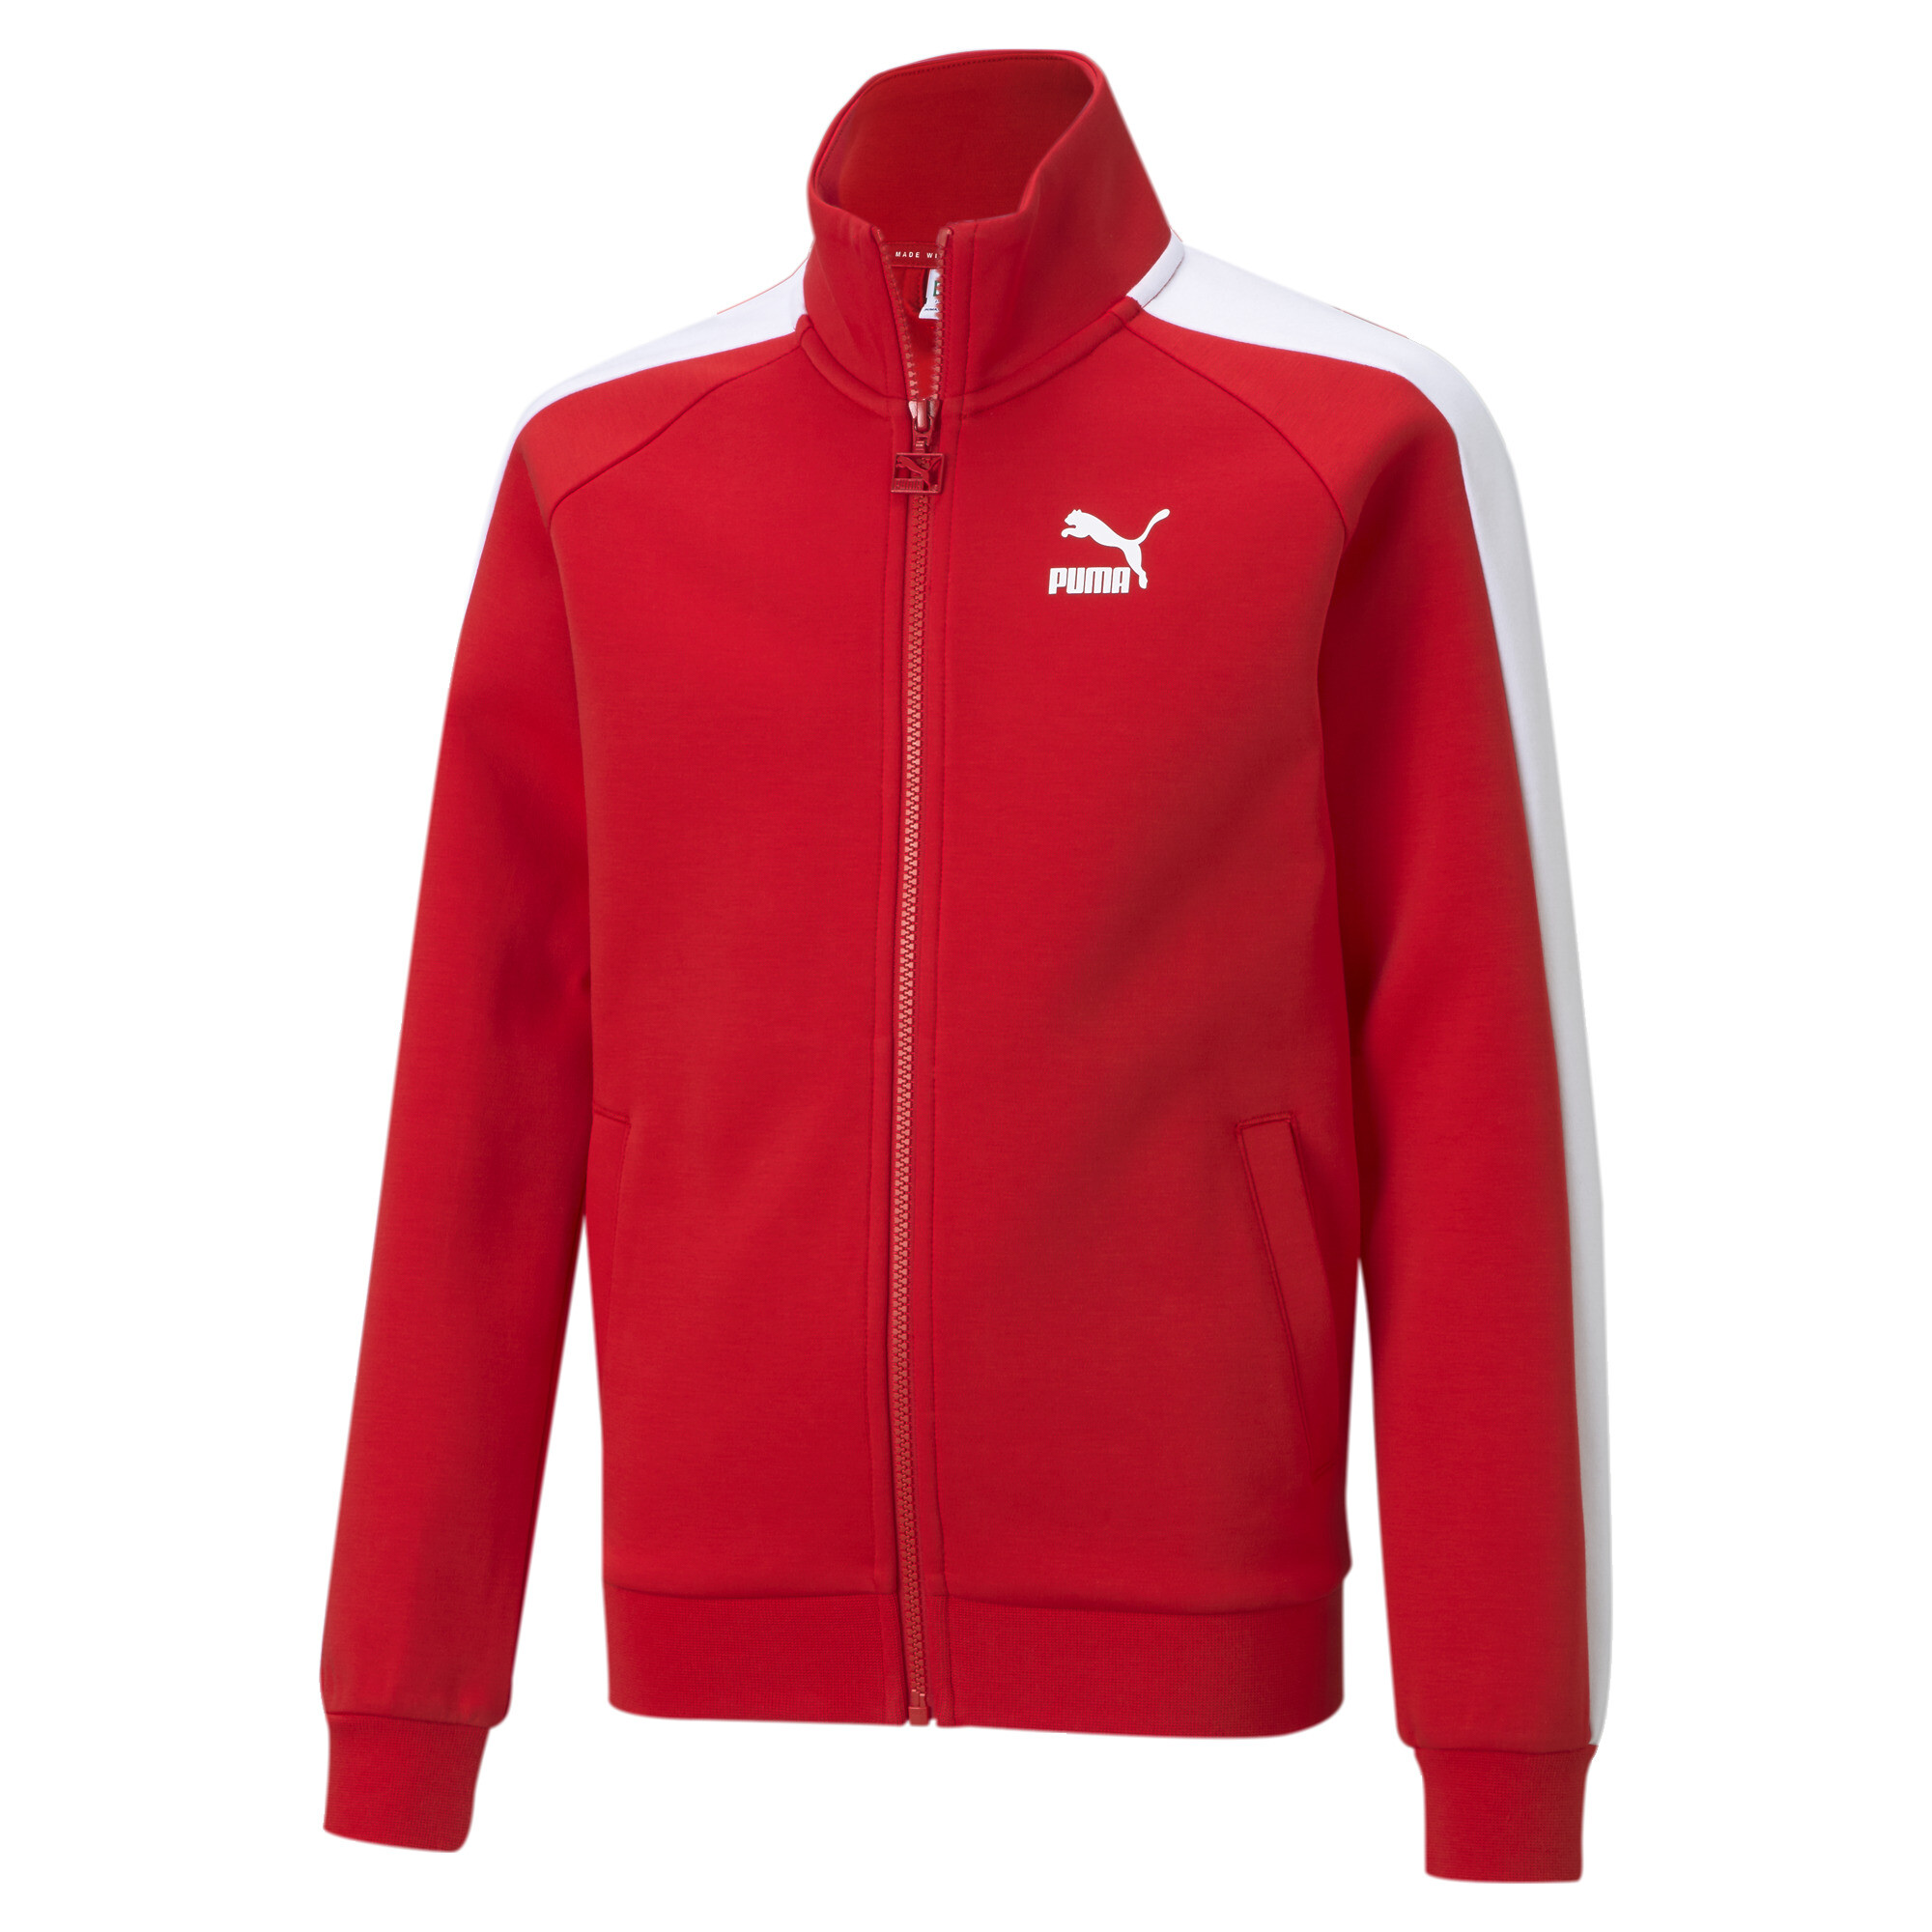 PUMA Iconic T7 Track Jacket In Red, Size 9-10 Youth